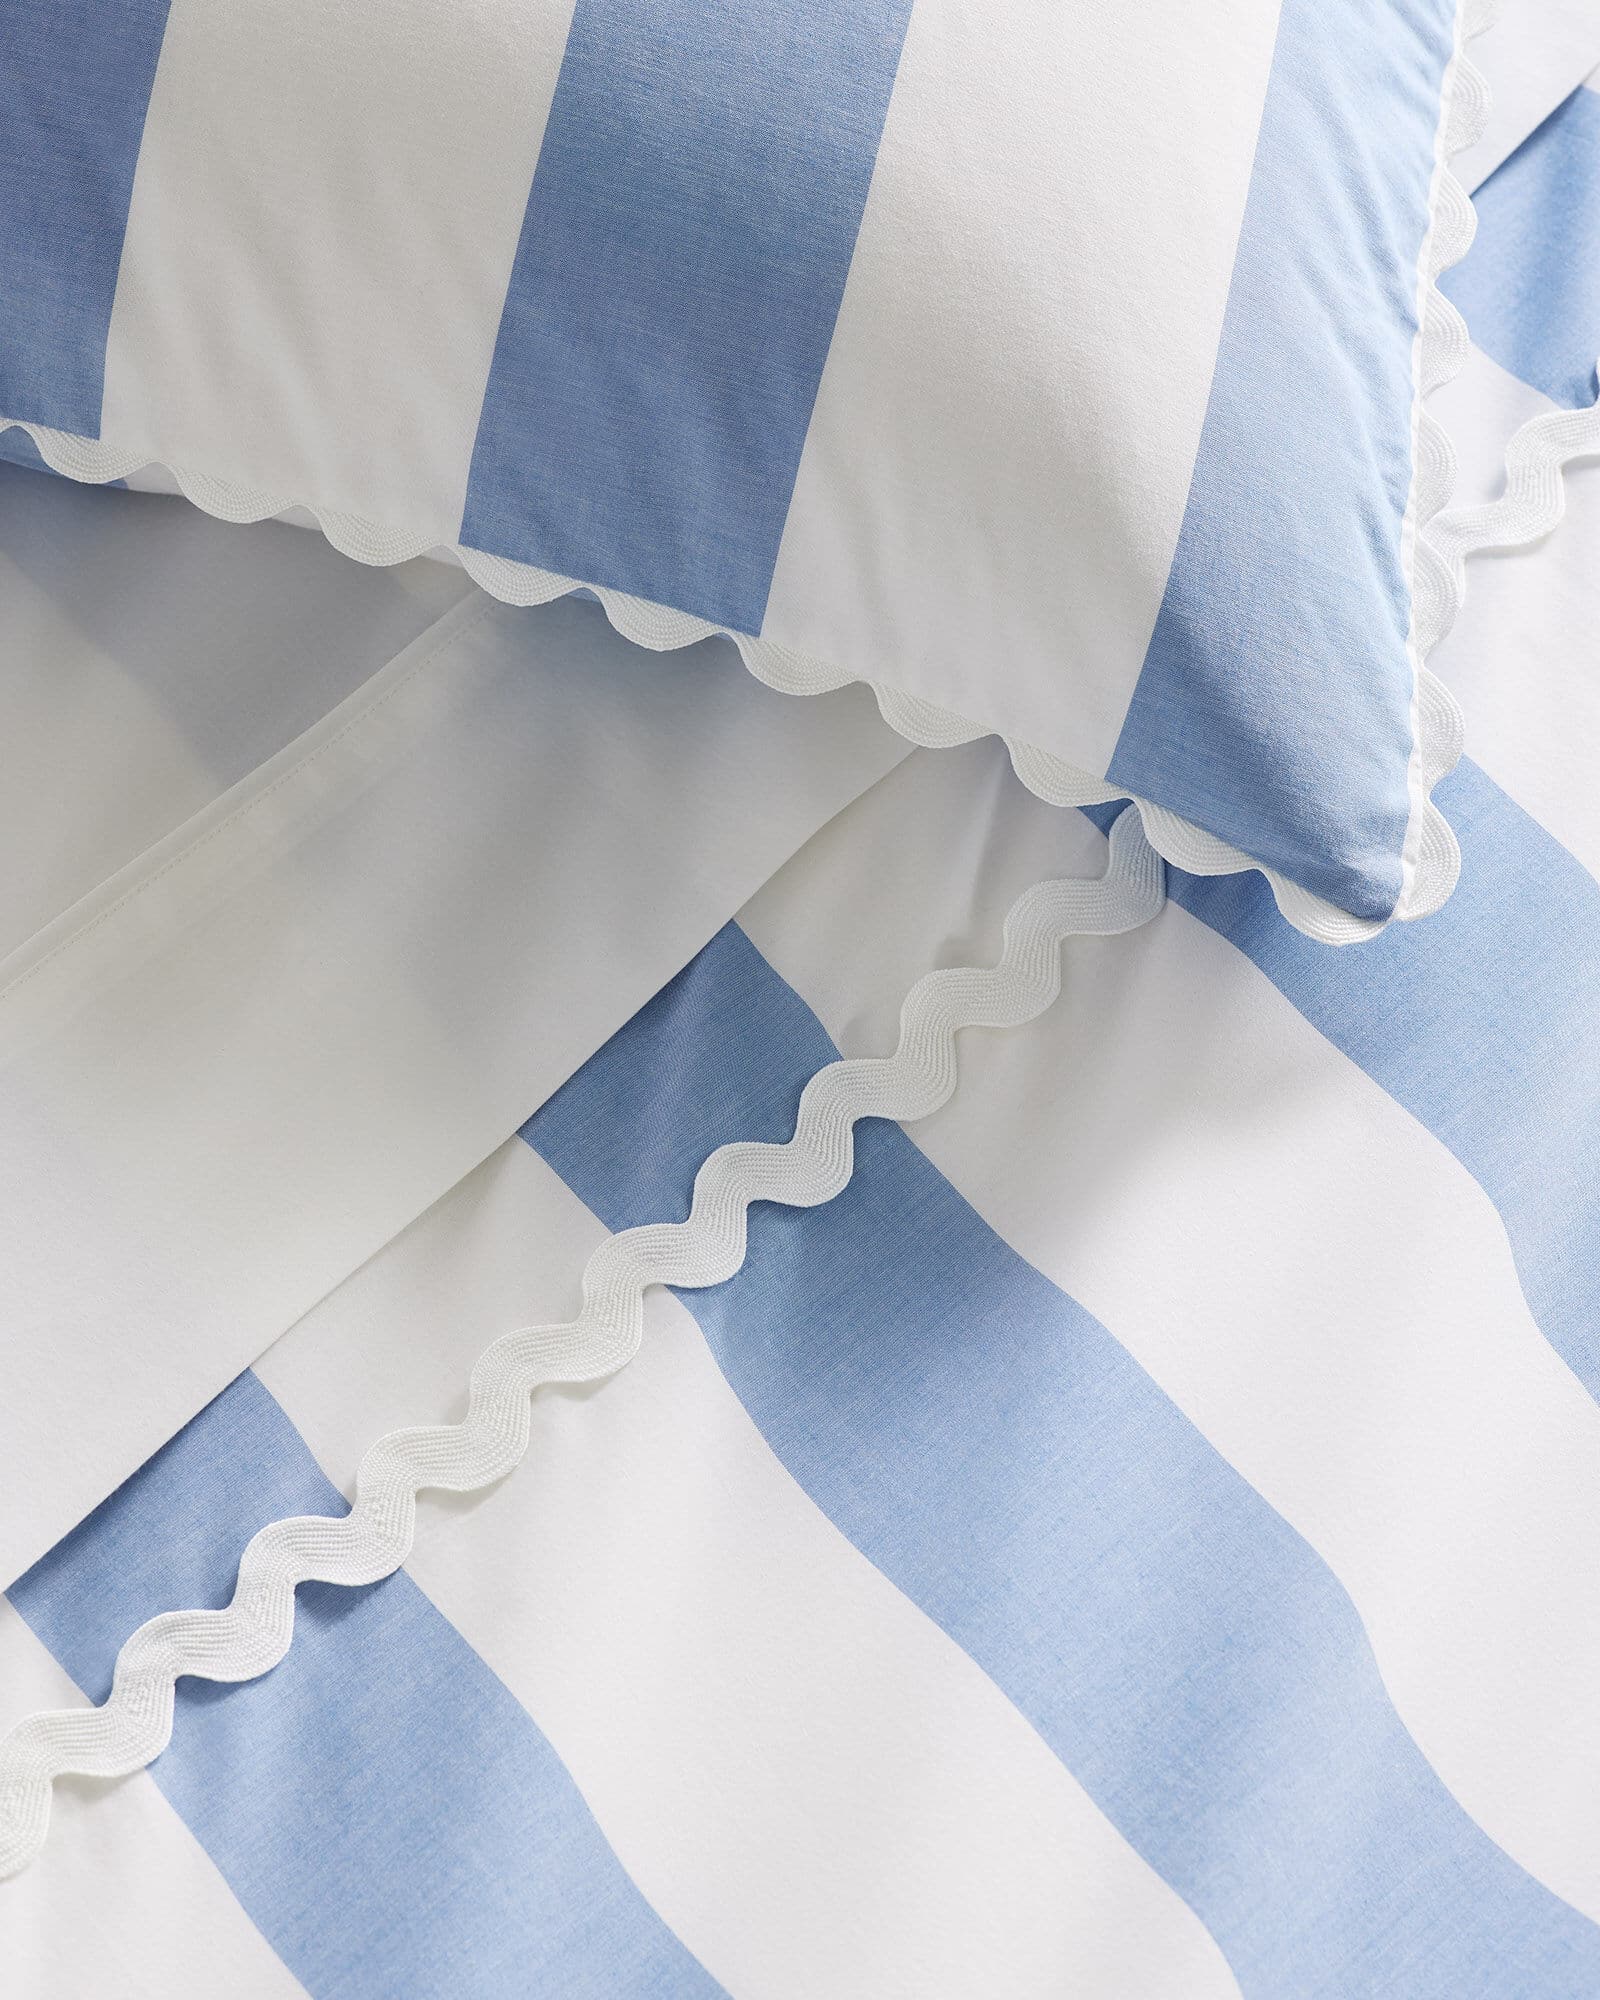 Blue & white stripe bedding perfect for summer - Serena & Lily - rickrack